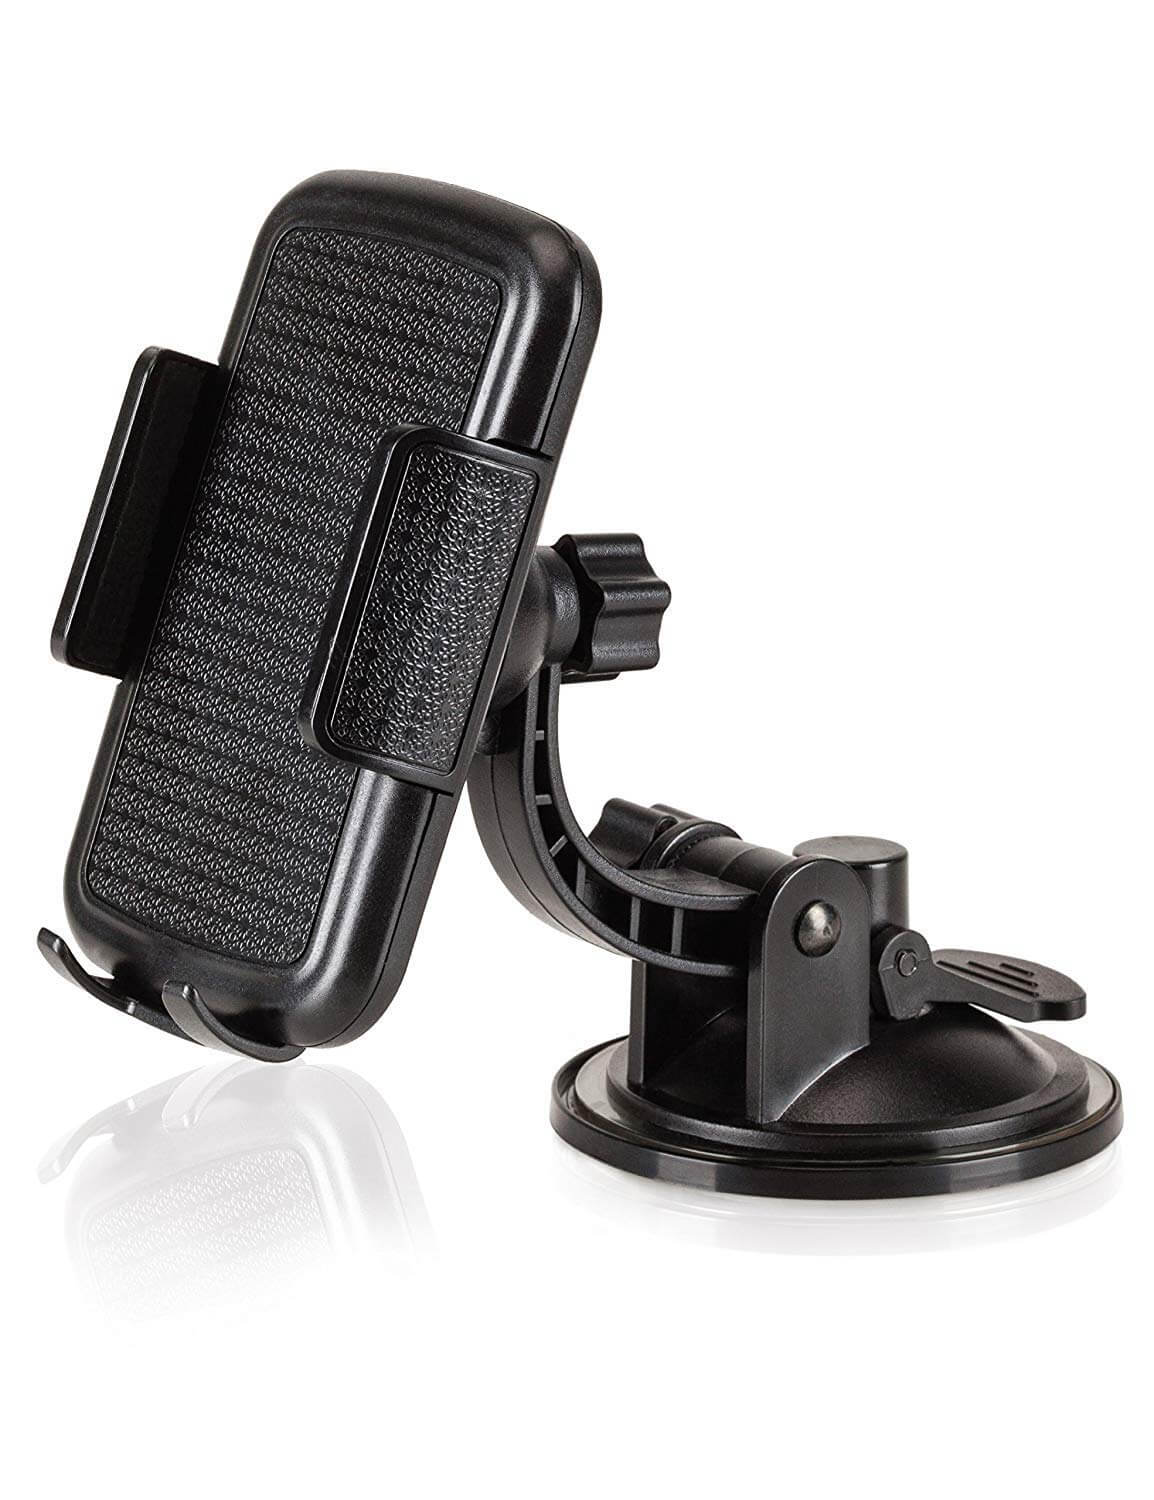 Cell phone car mount  Universal Dashboard & windshield Car Phone